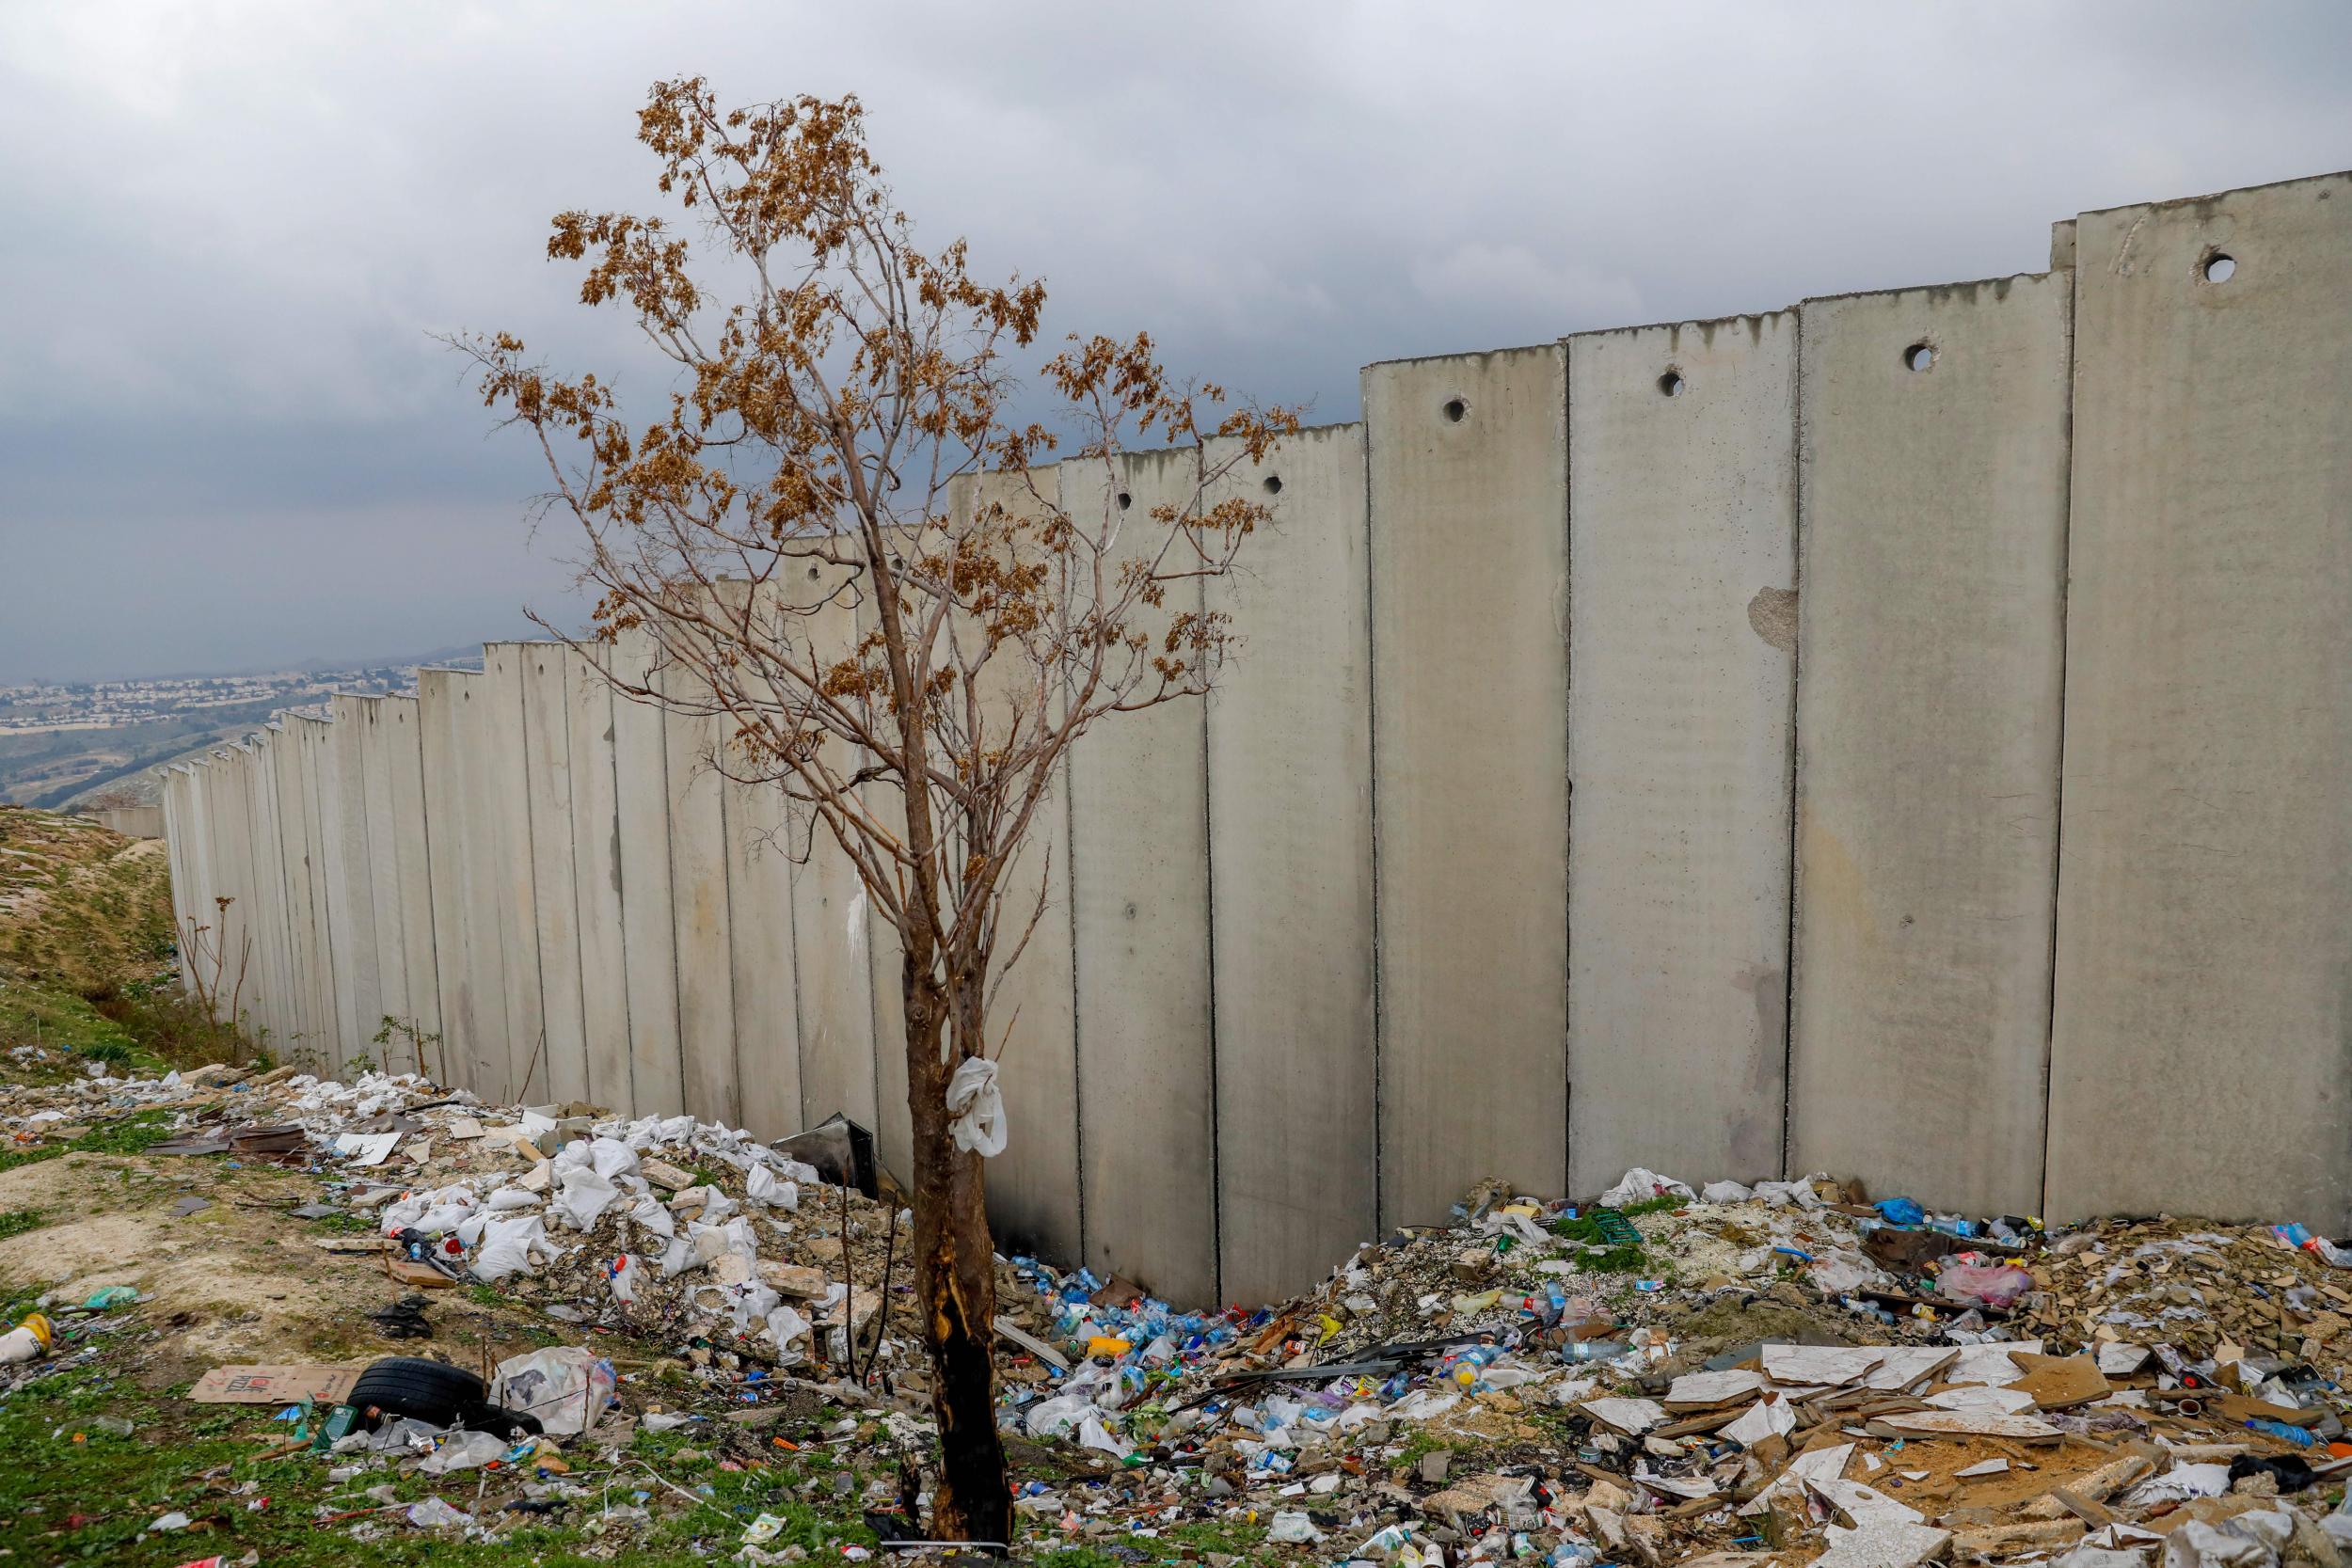 A view of the Israeli settlement of Maale Adumim in the occupied West Bank on the outskirts of Jerusalem